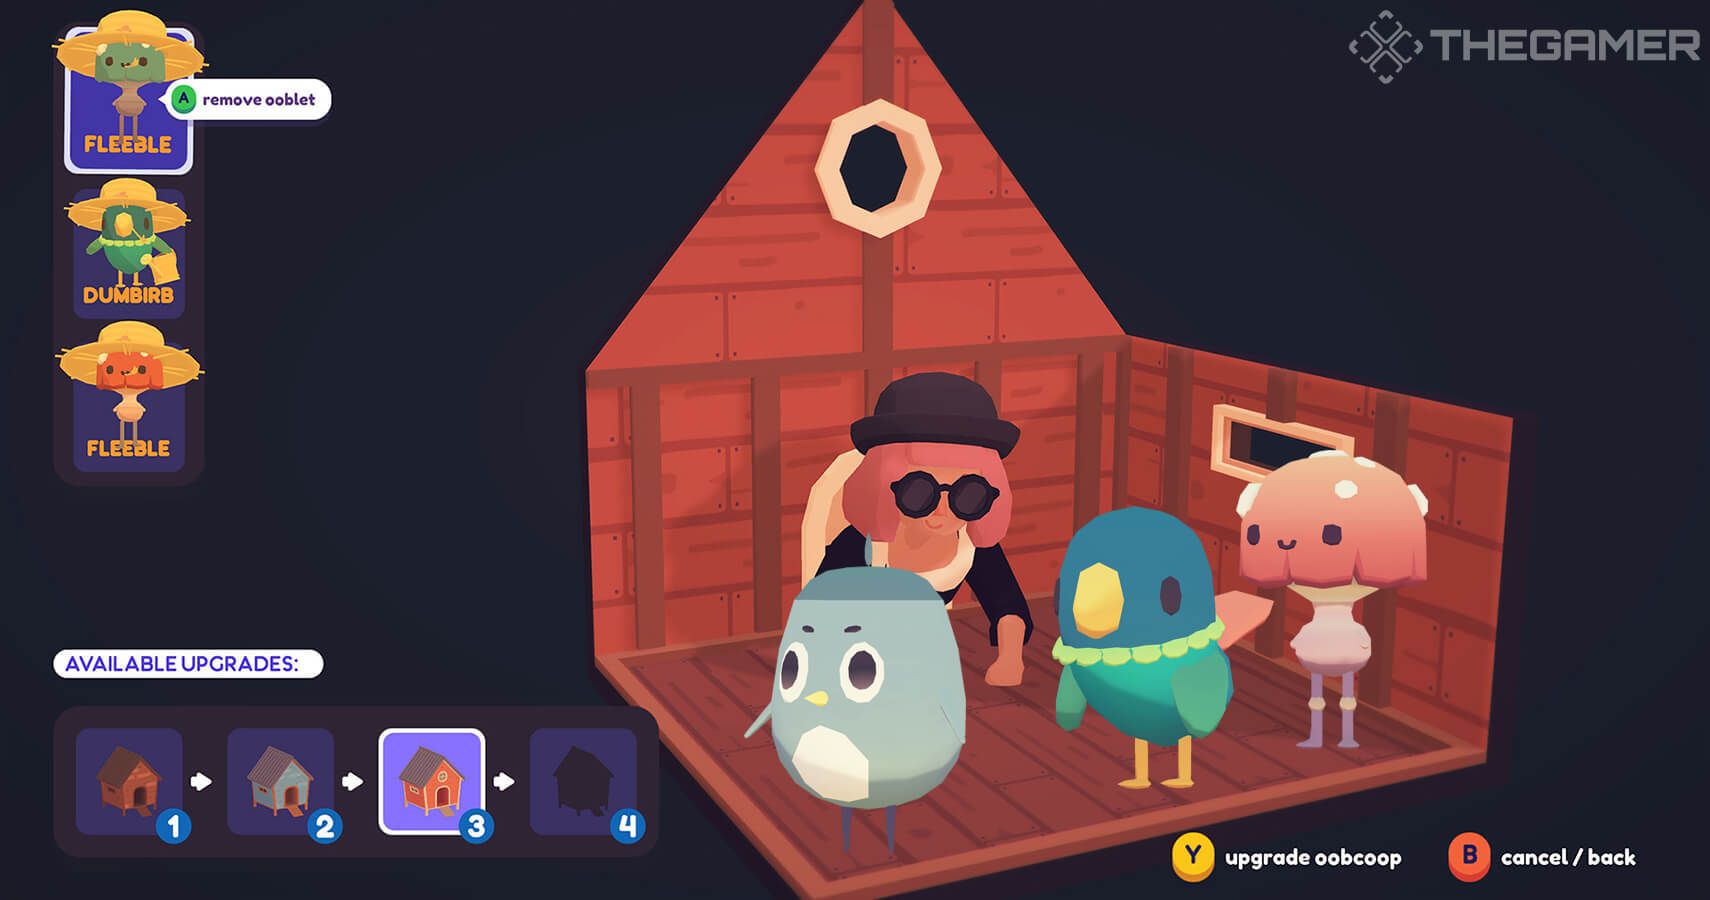 Ooblets for apple download free